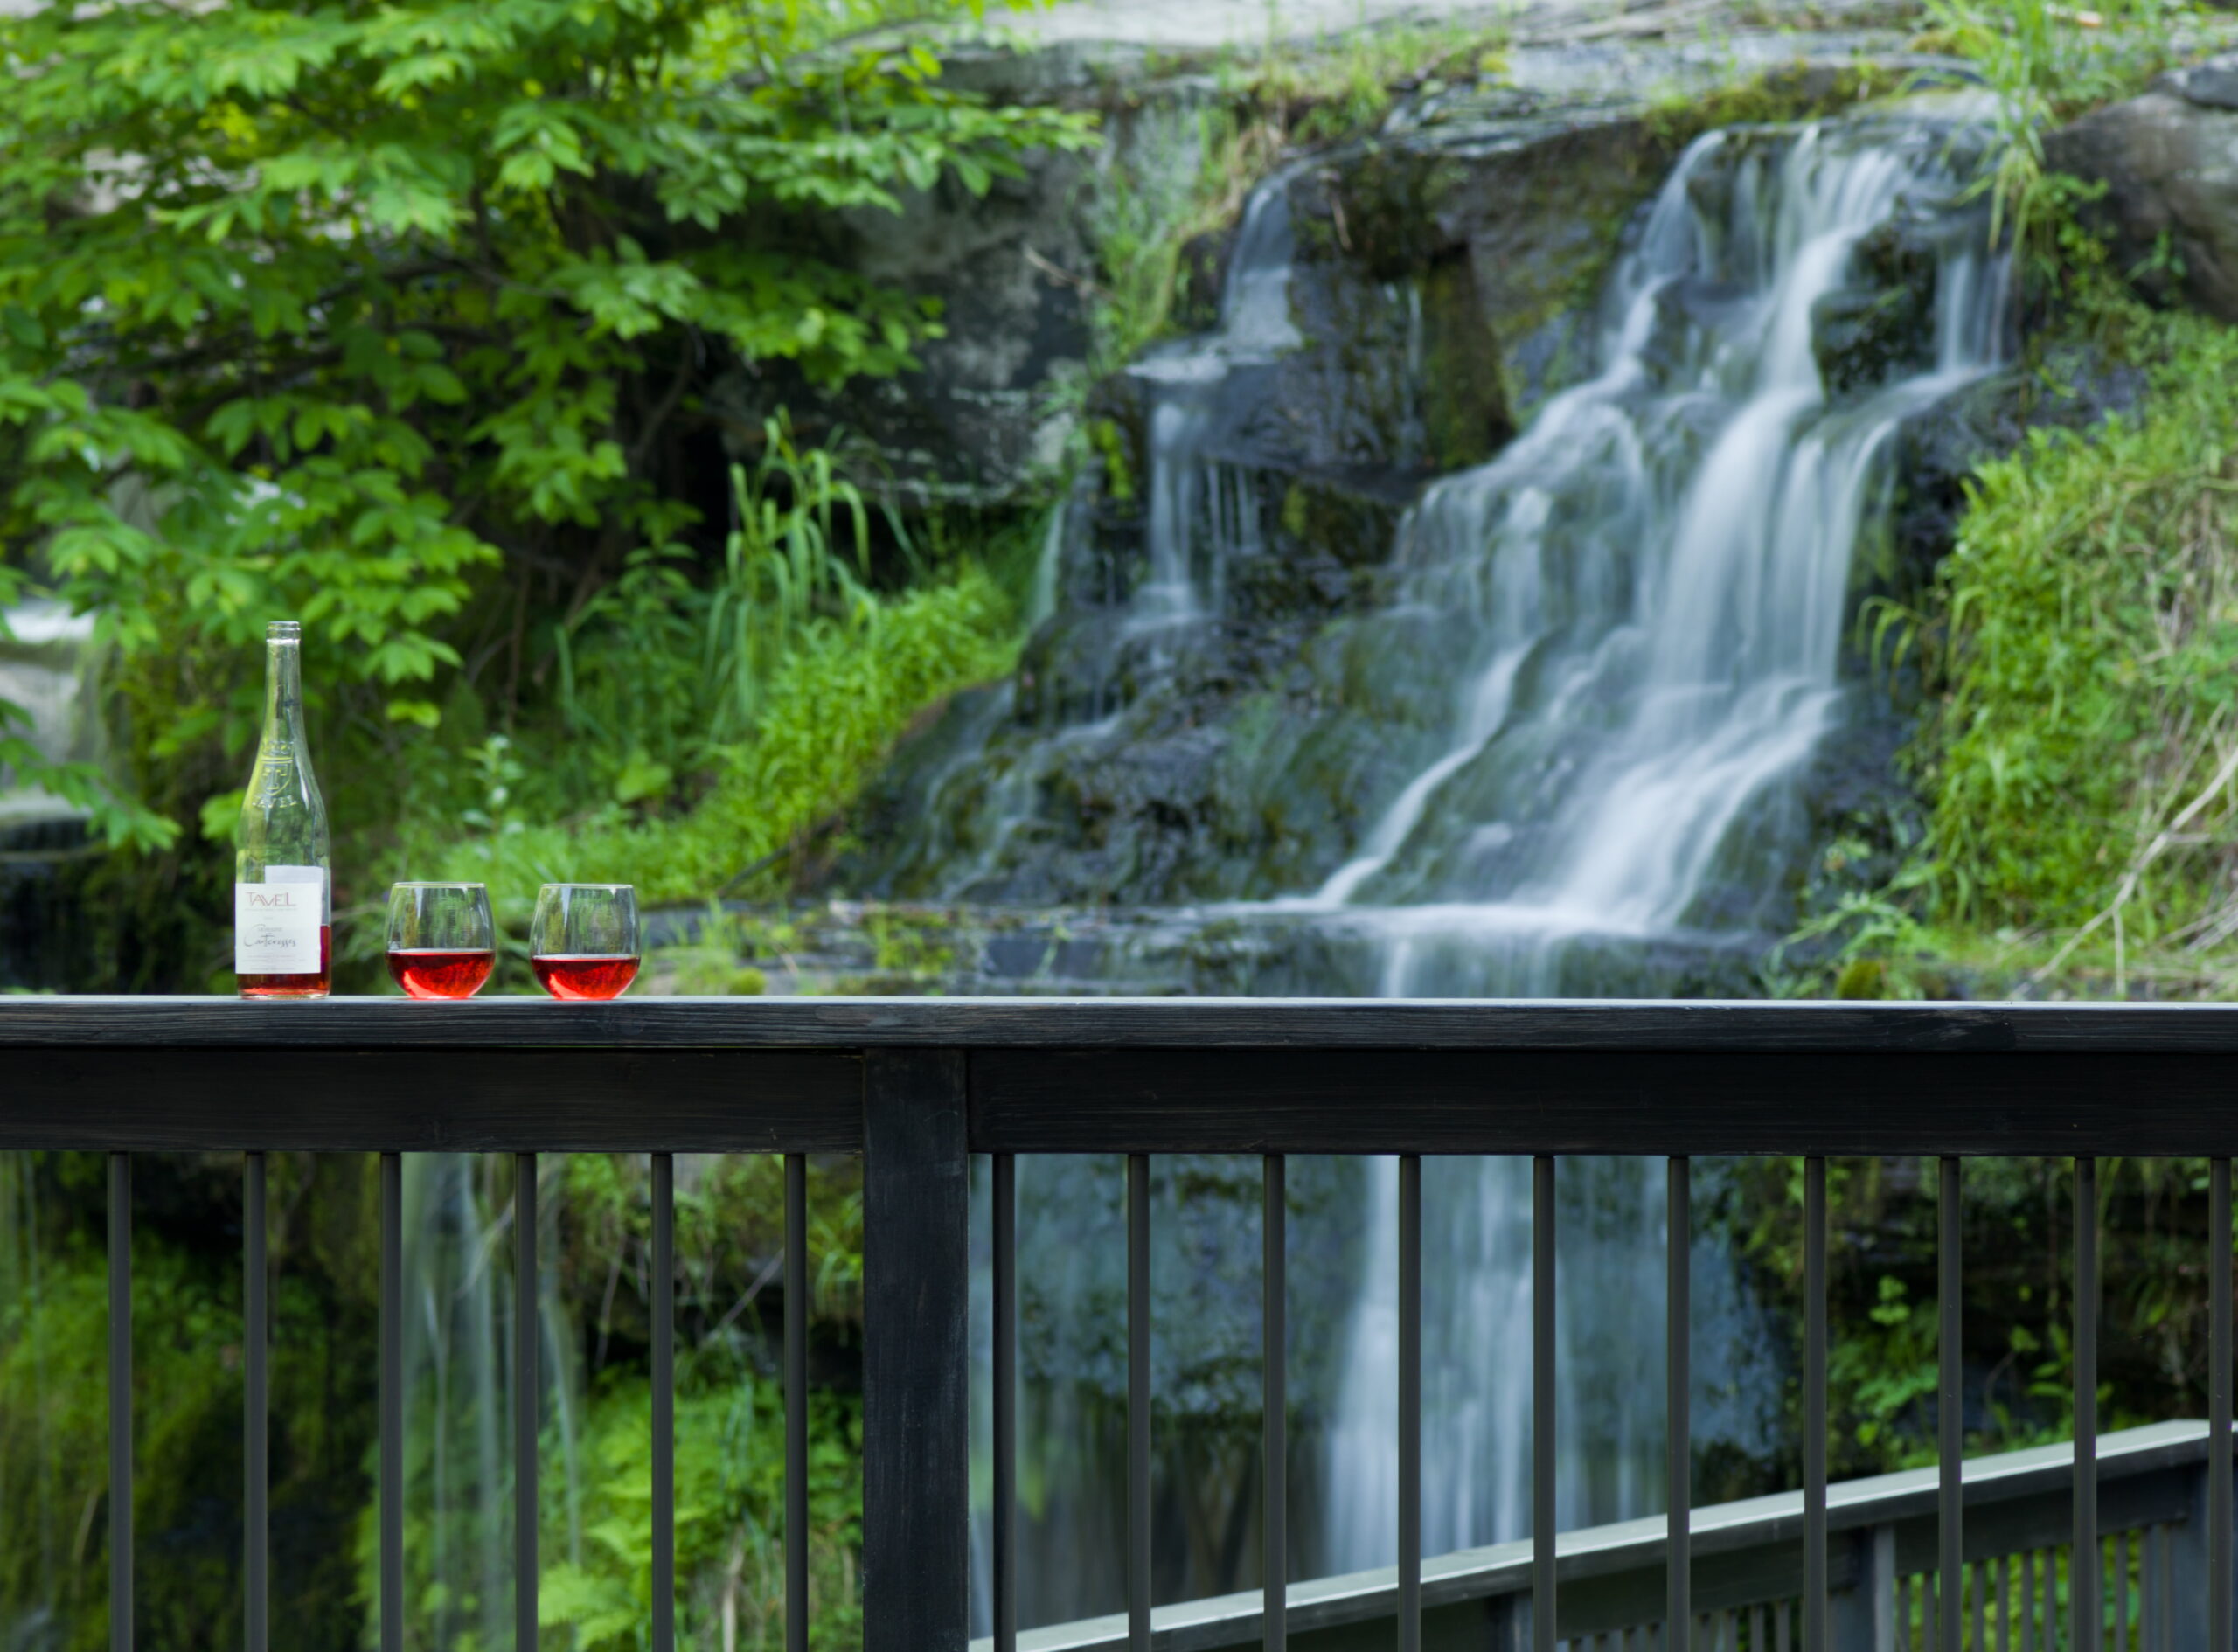 wine on a ledge by a waterfall